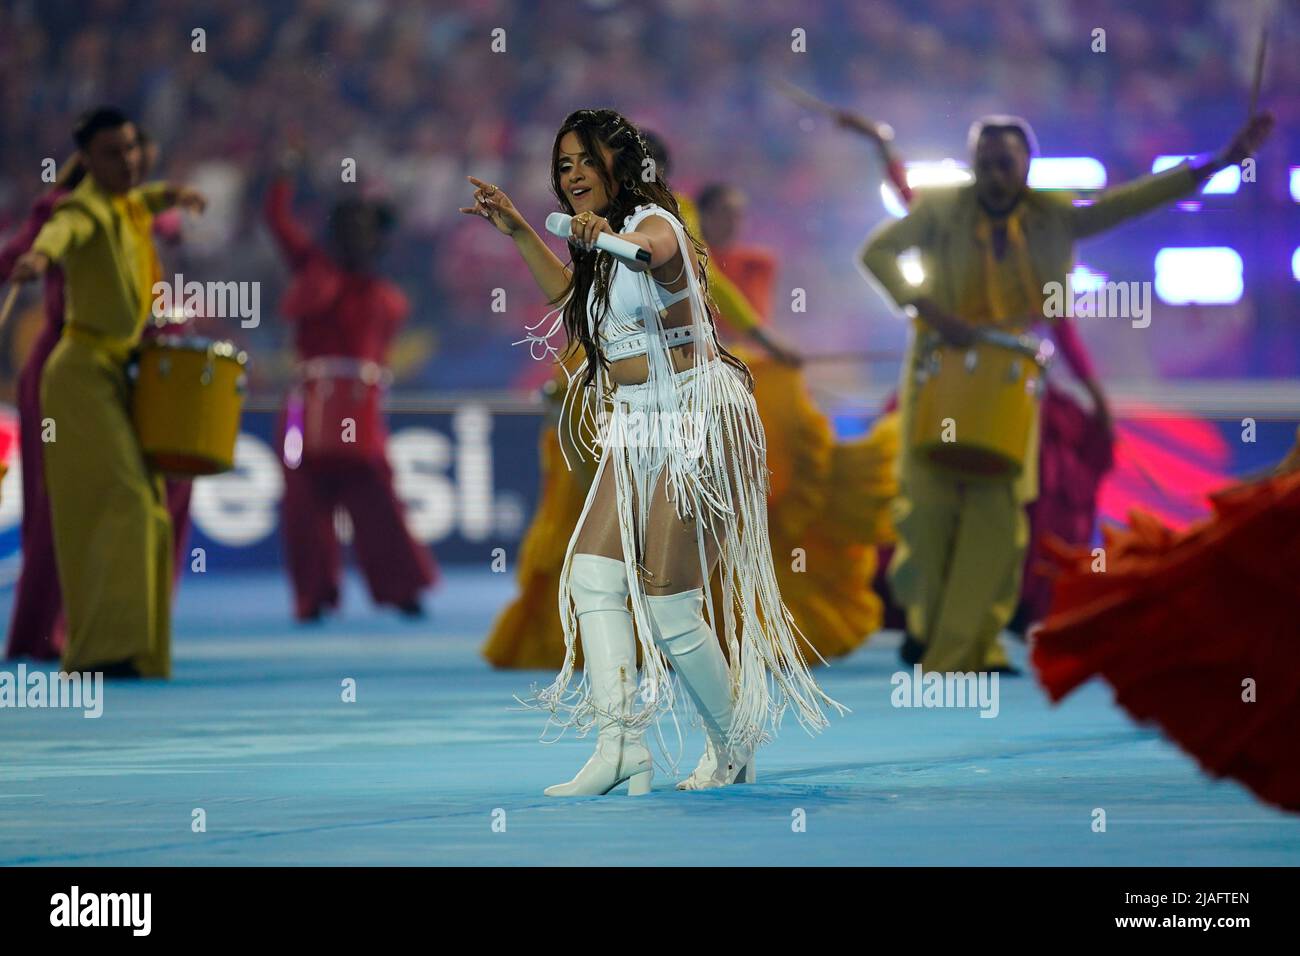 Camila Cabello during the UEFA Champions League Final match between Liverpool FC and Real Madrid played at Stade de France on May 28, 2022 in Paris, France. (Photo / Magma) Stock Photo